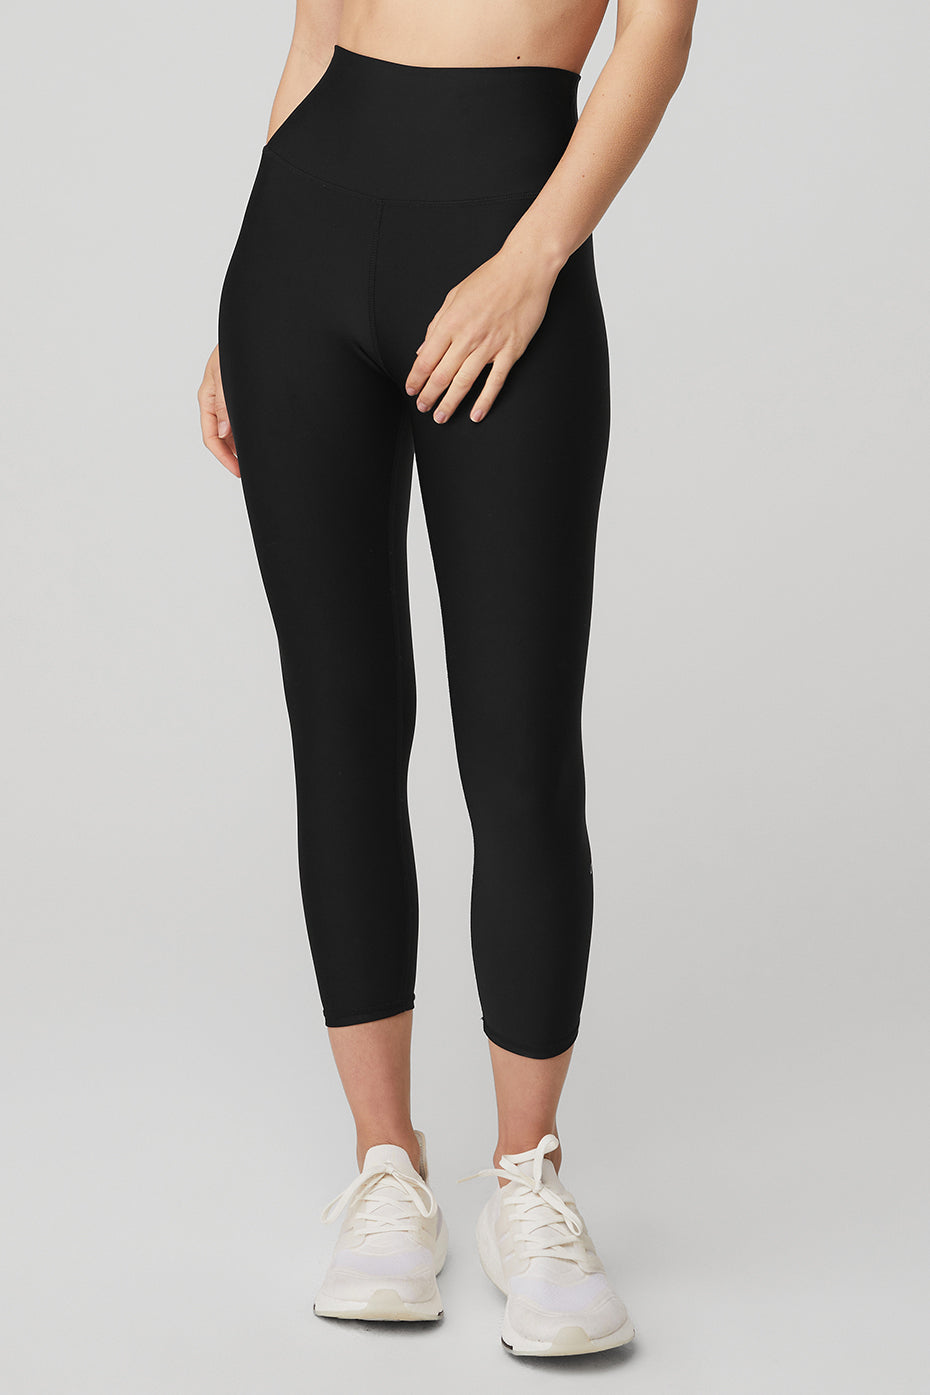 NWT! $114 Alo 7/8 High-Waist Airlift Legging, color woodrose, size